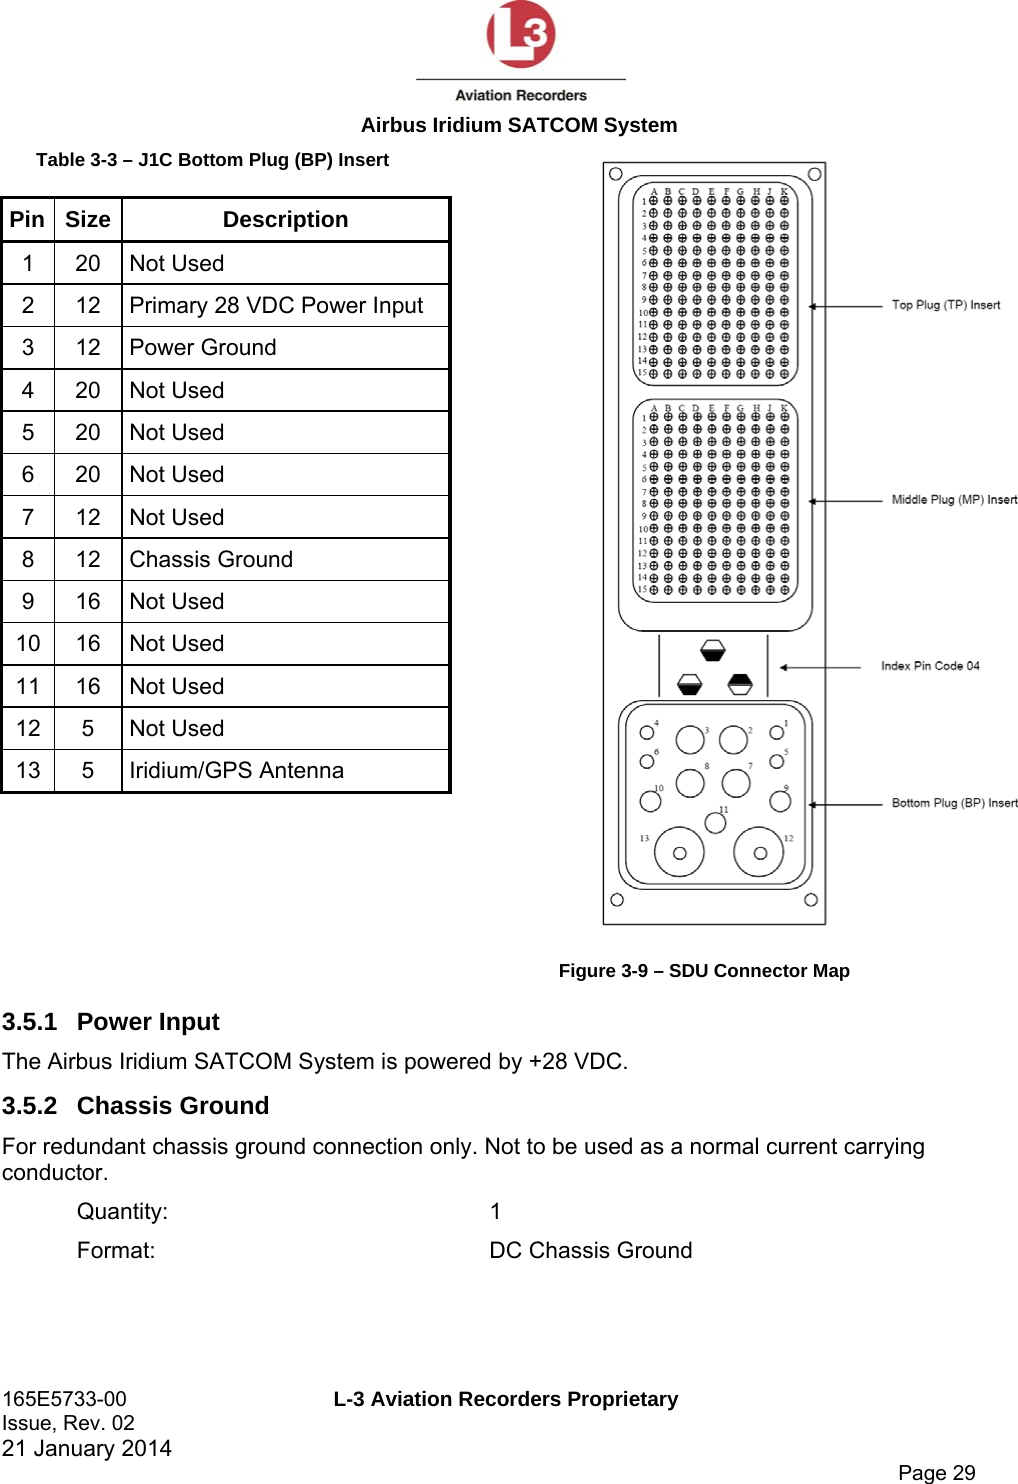  Airbus Iridium SATCOM System 165E5733-00  L-3 Aviation Recorders Proprietary Issue, Rev. 02   21 January 2014      Page 29 Table 3-3 – J1C Bottom Plug (BP) Insert Pin Size  Description 1 20 Not Used 2  12  Primary 28 VDC Power Input 3 12 Power Ground 4 20 Not Used 5 20 Not Used 6 20 Not Used 7 12 Not Used 8 12 Chassis Ground 9 16 Not Used 10 16 Not Used 11 16 Not Used 12 5 Not Used 13 5 Iridium/GPS Antenna                Figure 3-9 – SDU Connector Map 3.5.1 Power Input The Airbus Iridium SATCOM System is powered by +28 VDC. 3.5.2 Chassis Ground For redundant chassis ground connection only. Not to be used as a normal current carrying conductor. Quantity: 1 Format:  DC Chassis Ground   